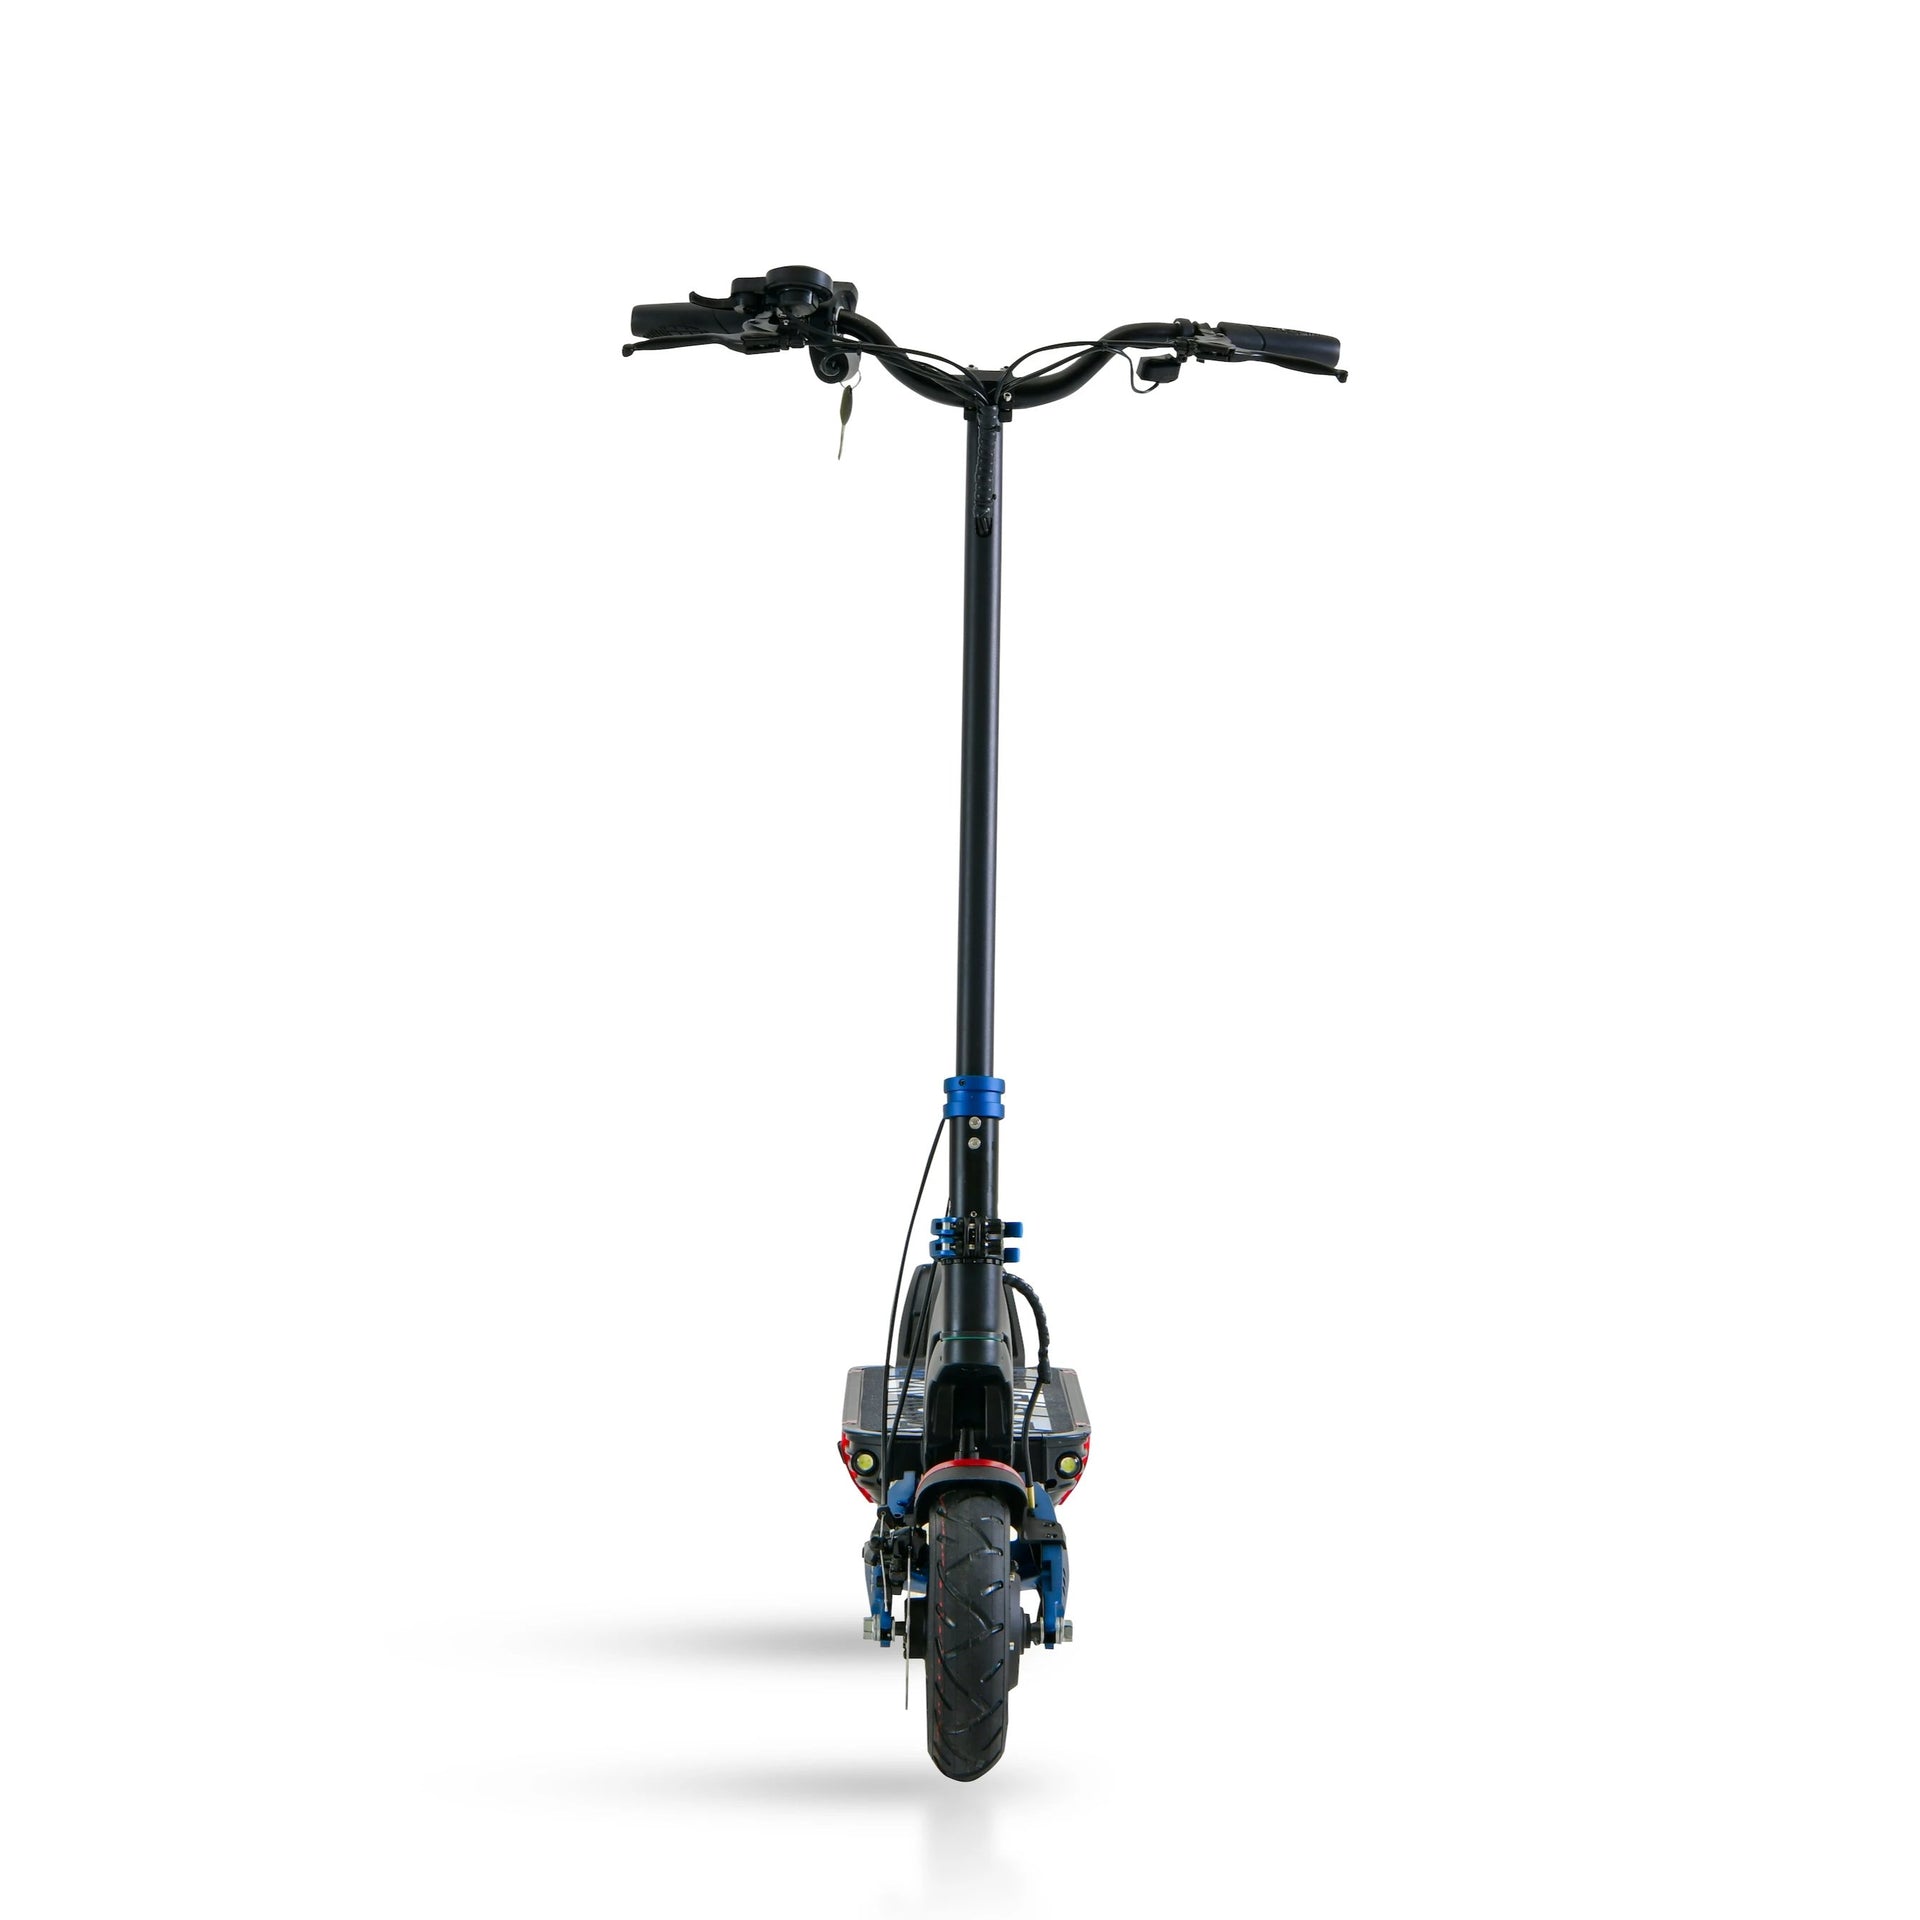 Apollo Pro The Most Powerful Electric Scooter